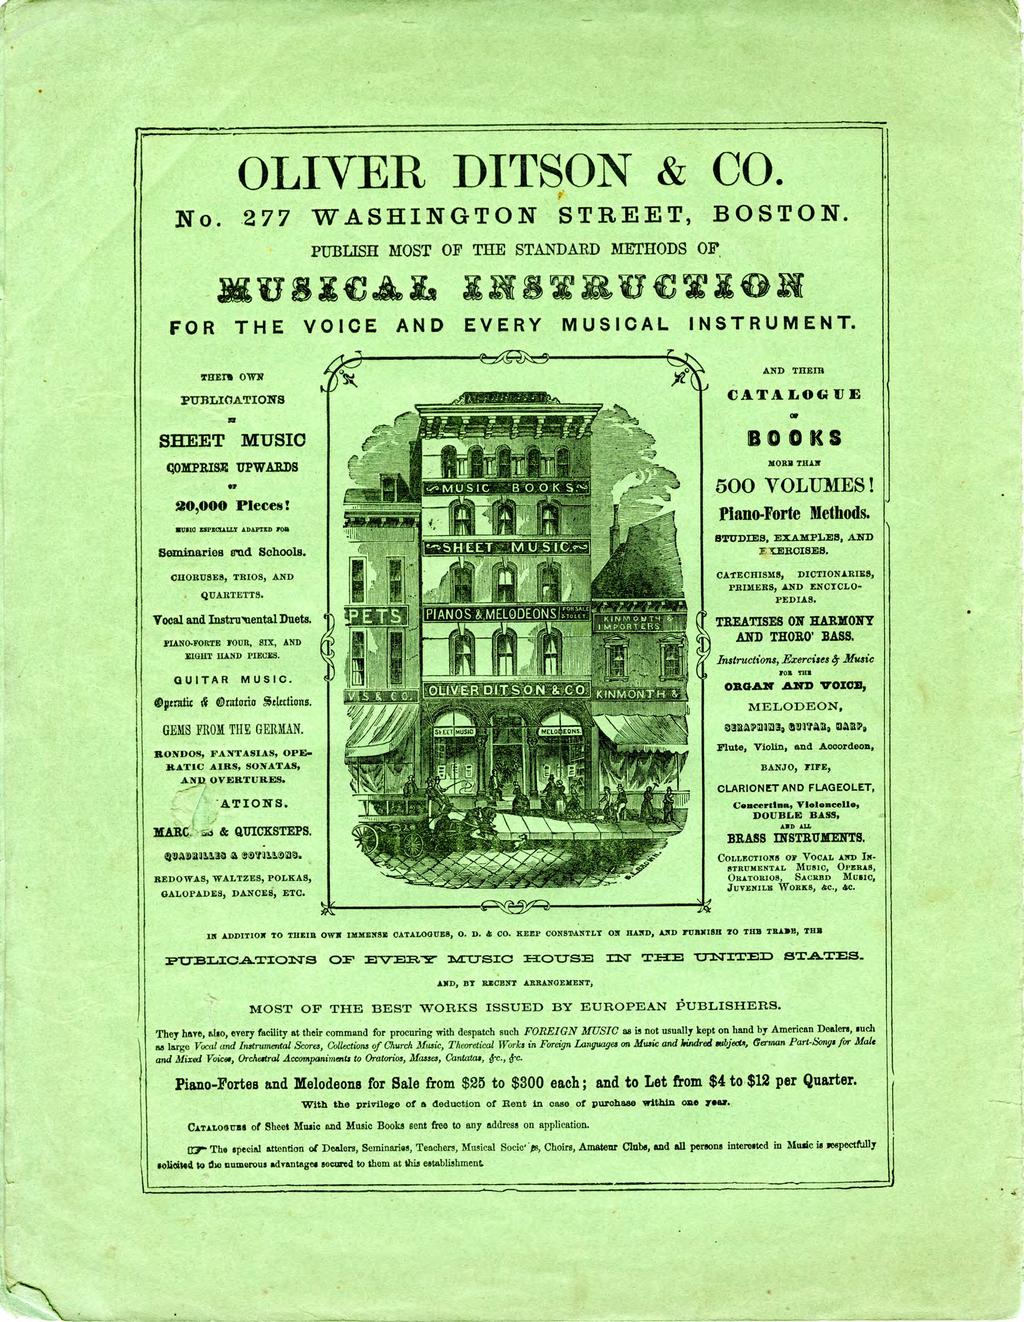 OLER DTSON & CO. No.. 277 WASHNGTON,,. STREET, PUBLSH MOST OF THE STANDARD METHODS OF, BOSTON. FOR THE OCE AND EERY MUSCAL NS TR U M ENT. llb.e11 OWN PUBLOATONS.